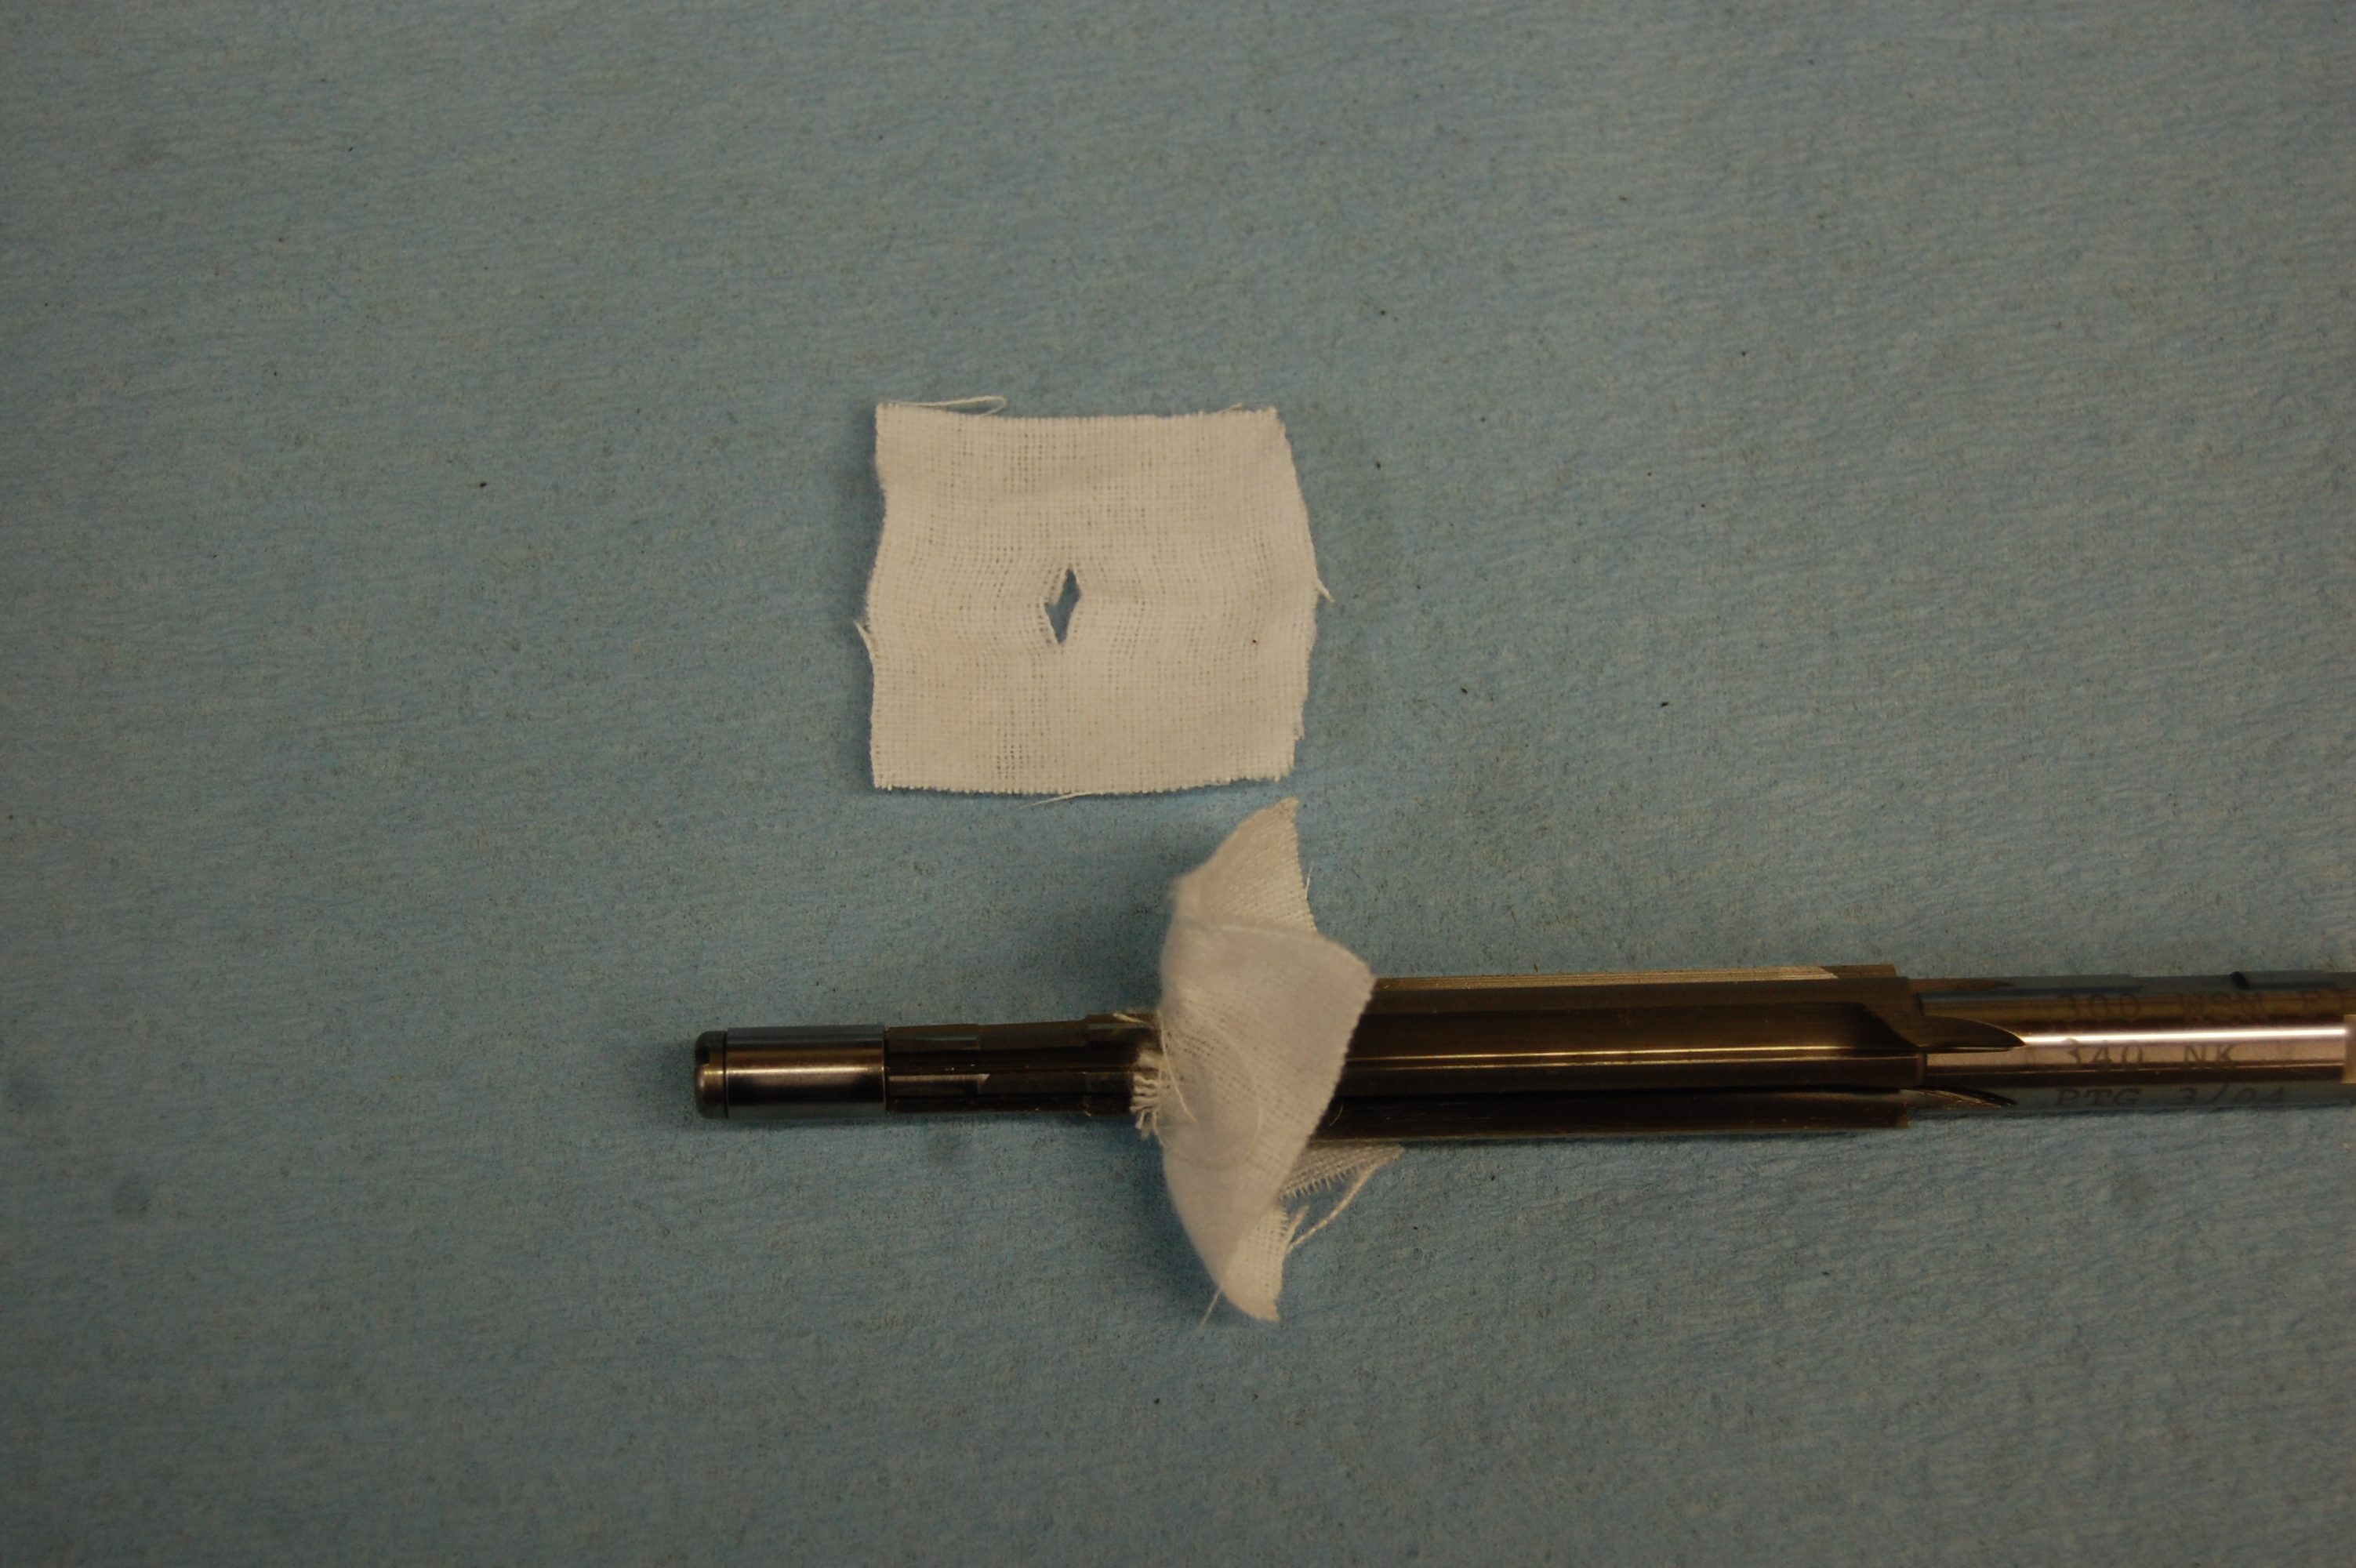 Cleaning patch on a reamer to control and eliminate chatter.